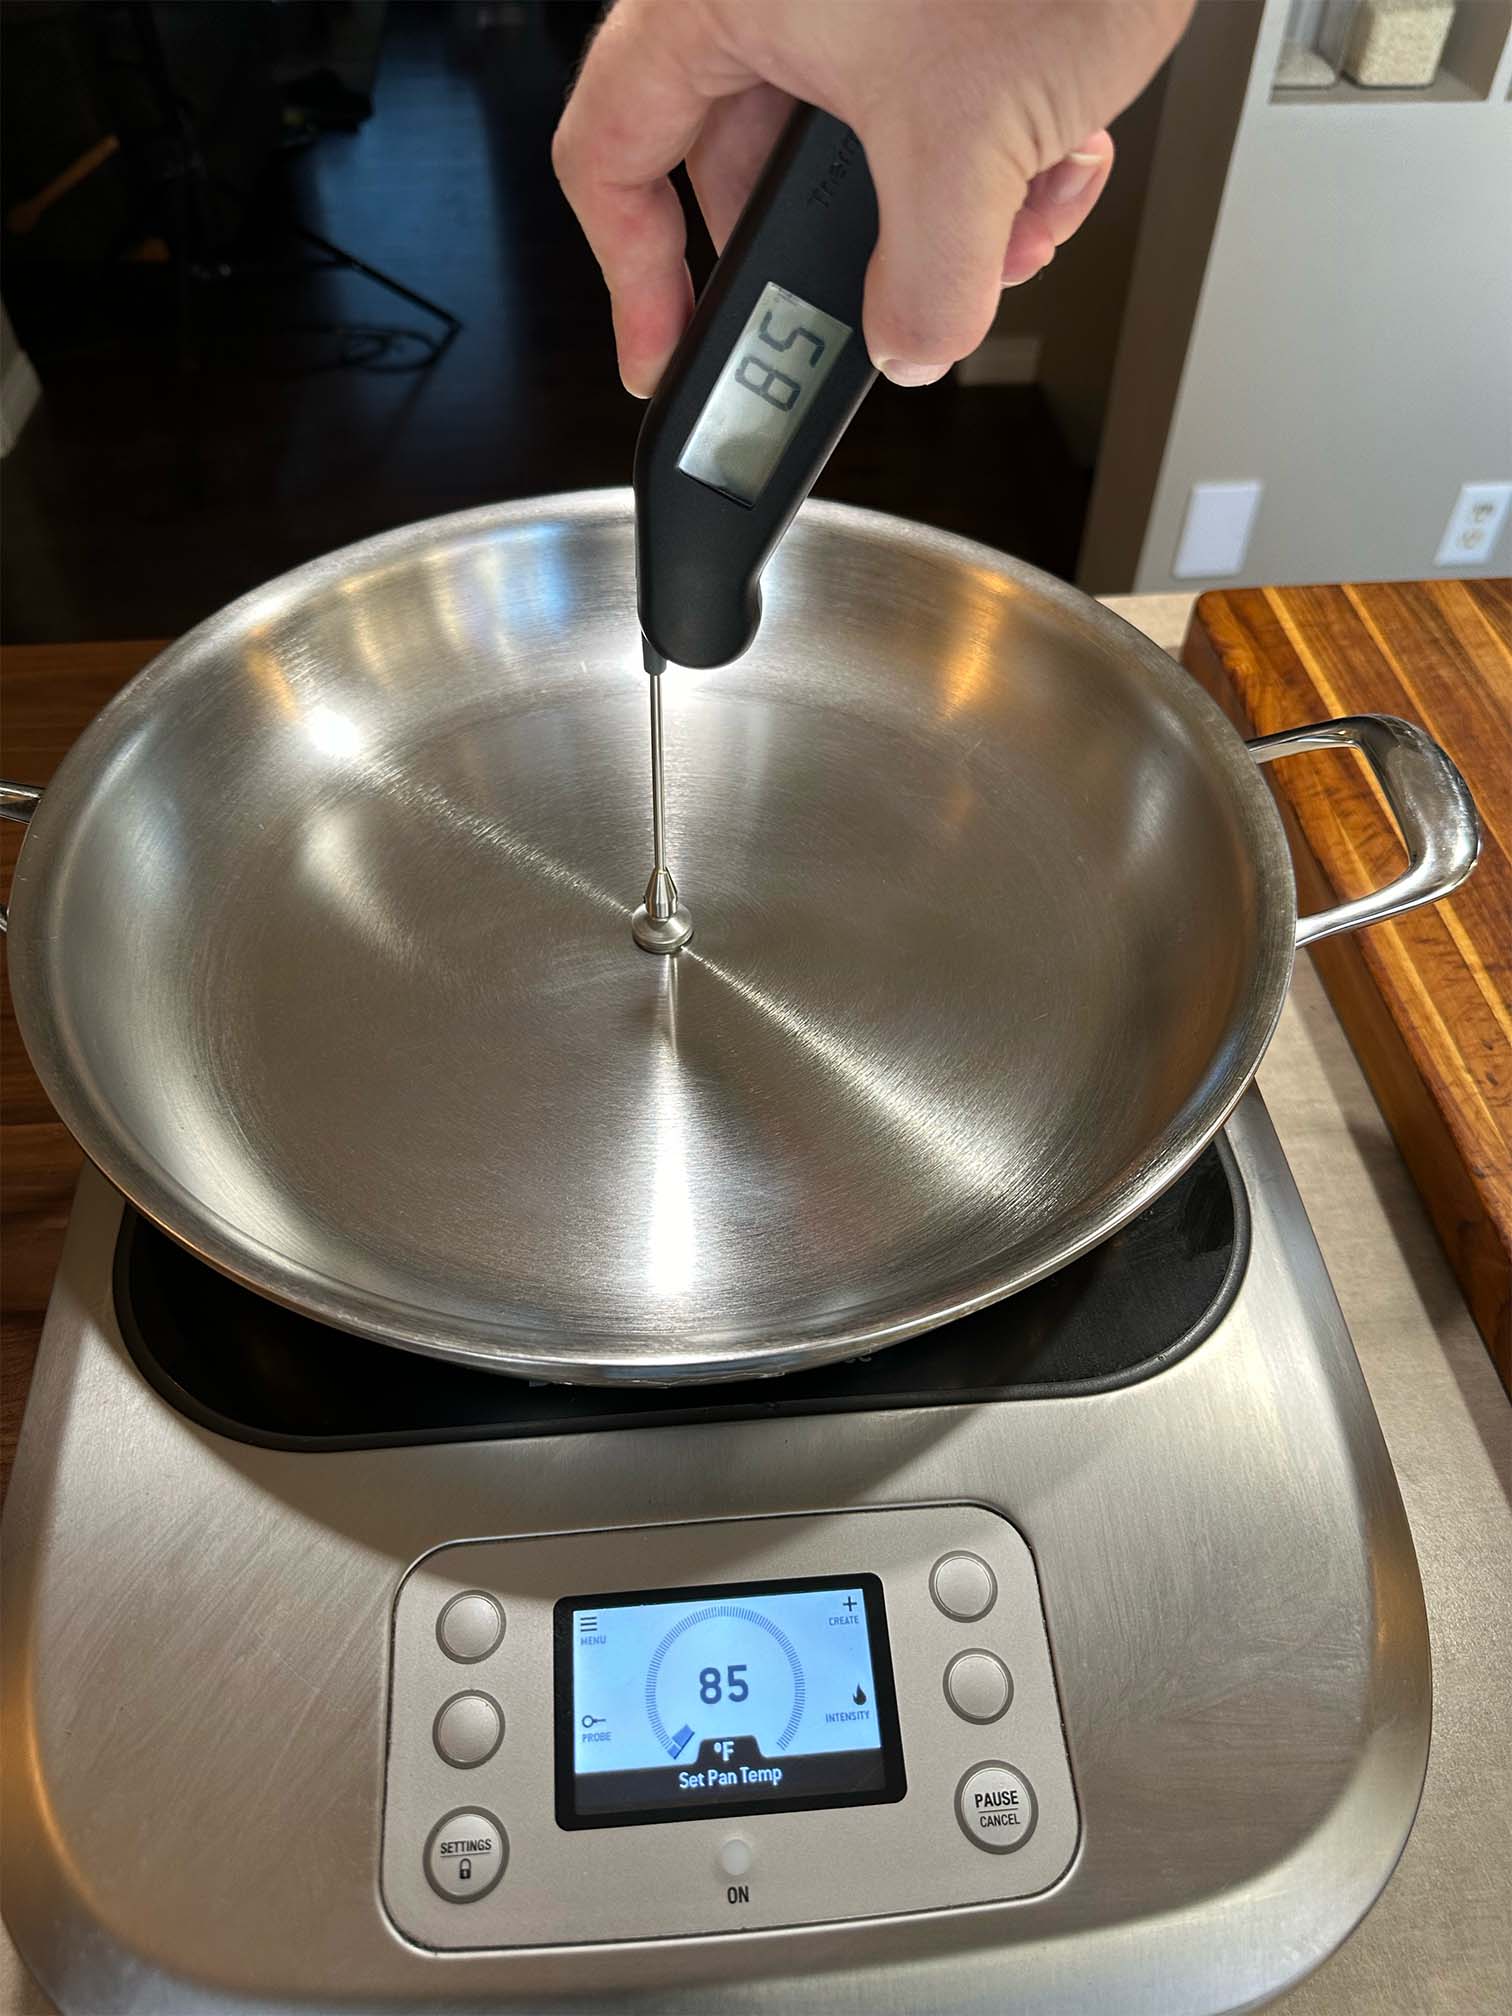 Measuring the pan's temperature with the Breville Commercial Control Freak and the ThermoWorks Pro-Surface Thermapen.